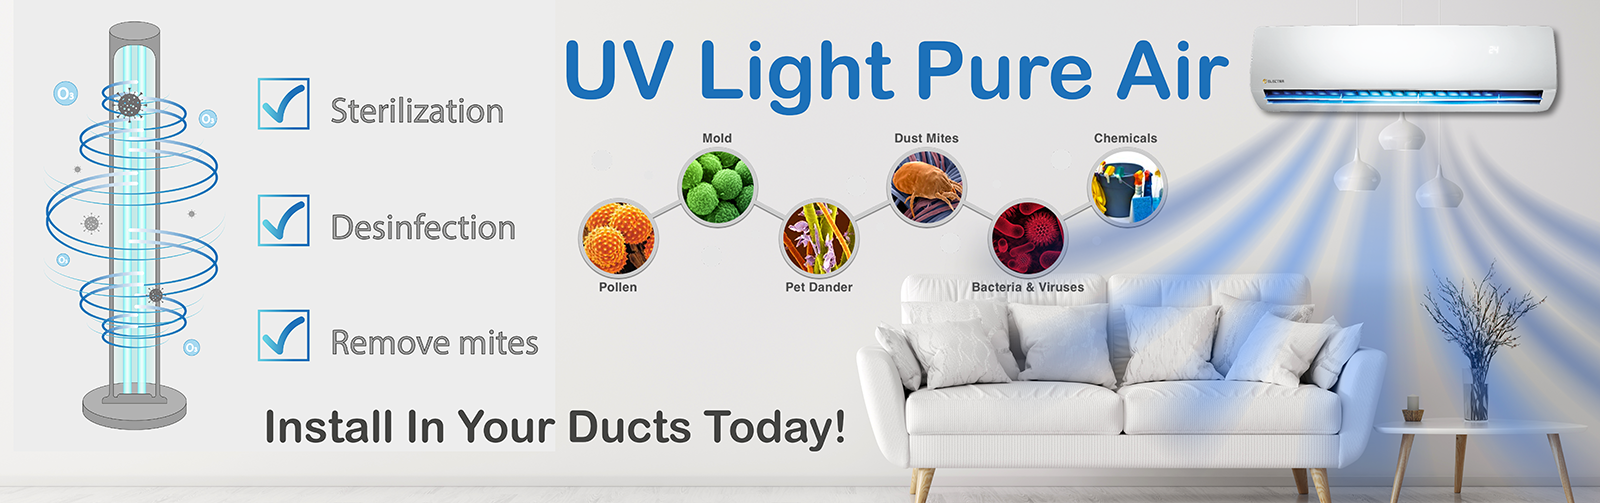 UV Lights Pure Air Install in Your Ducts Today